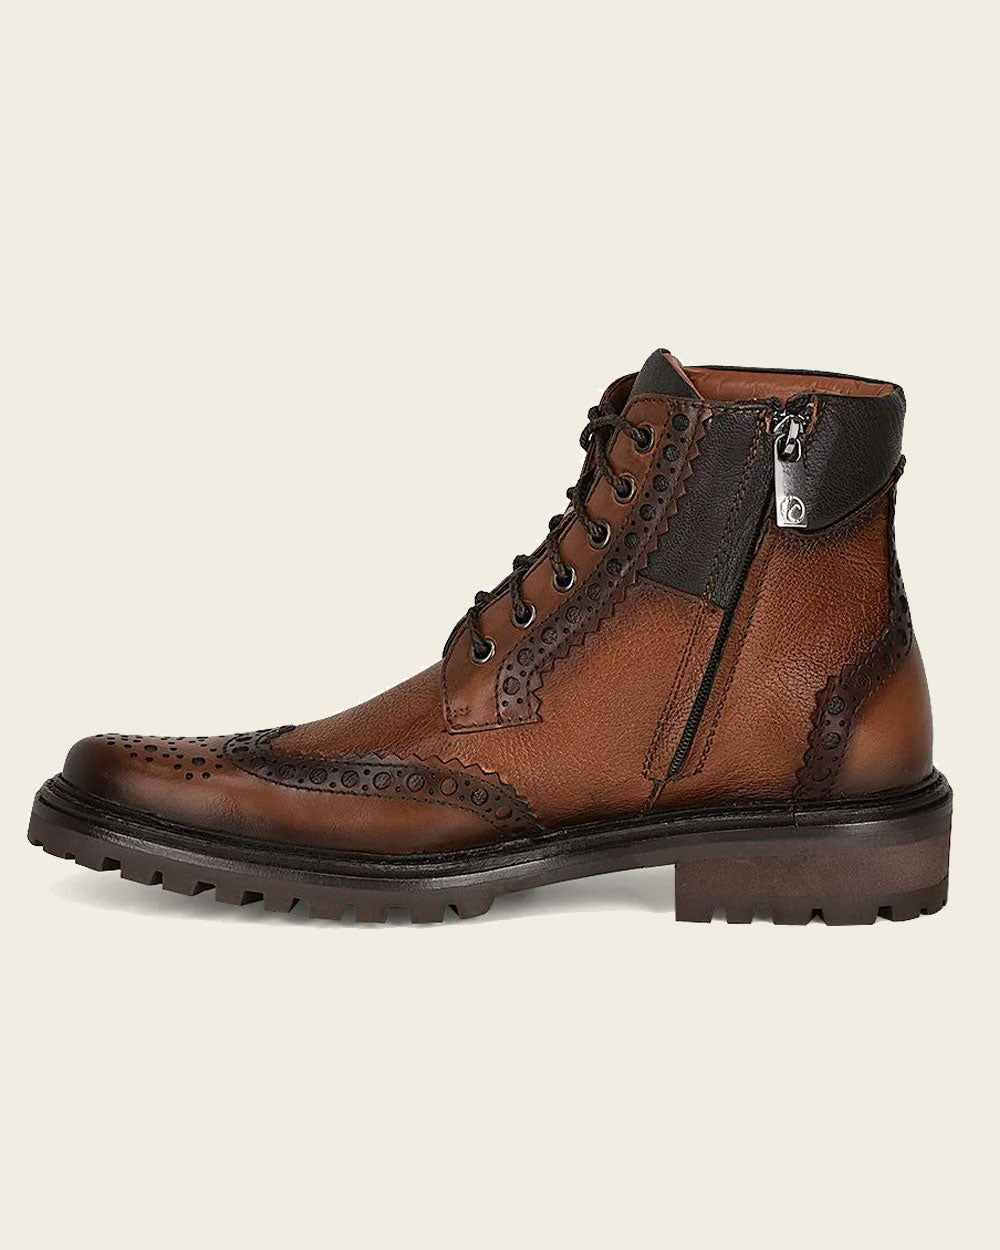 Metal Monogram Application: Flaunting the iconic Franco Cuadra monogram in metal on one side, this boot exudes luxury and exclusivity.